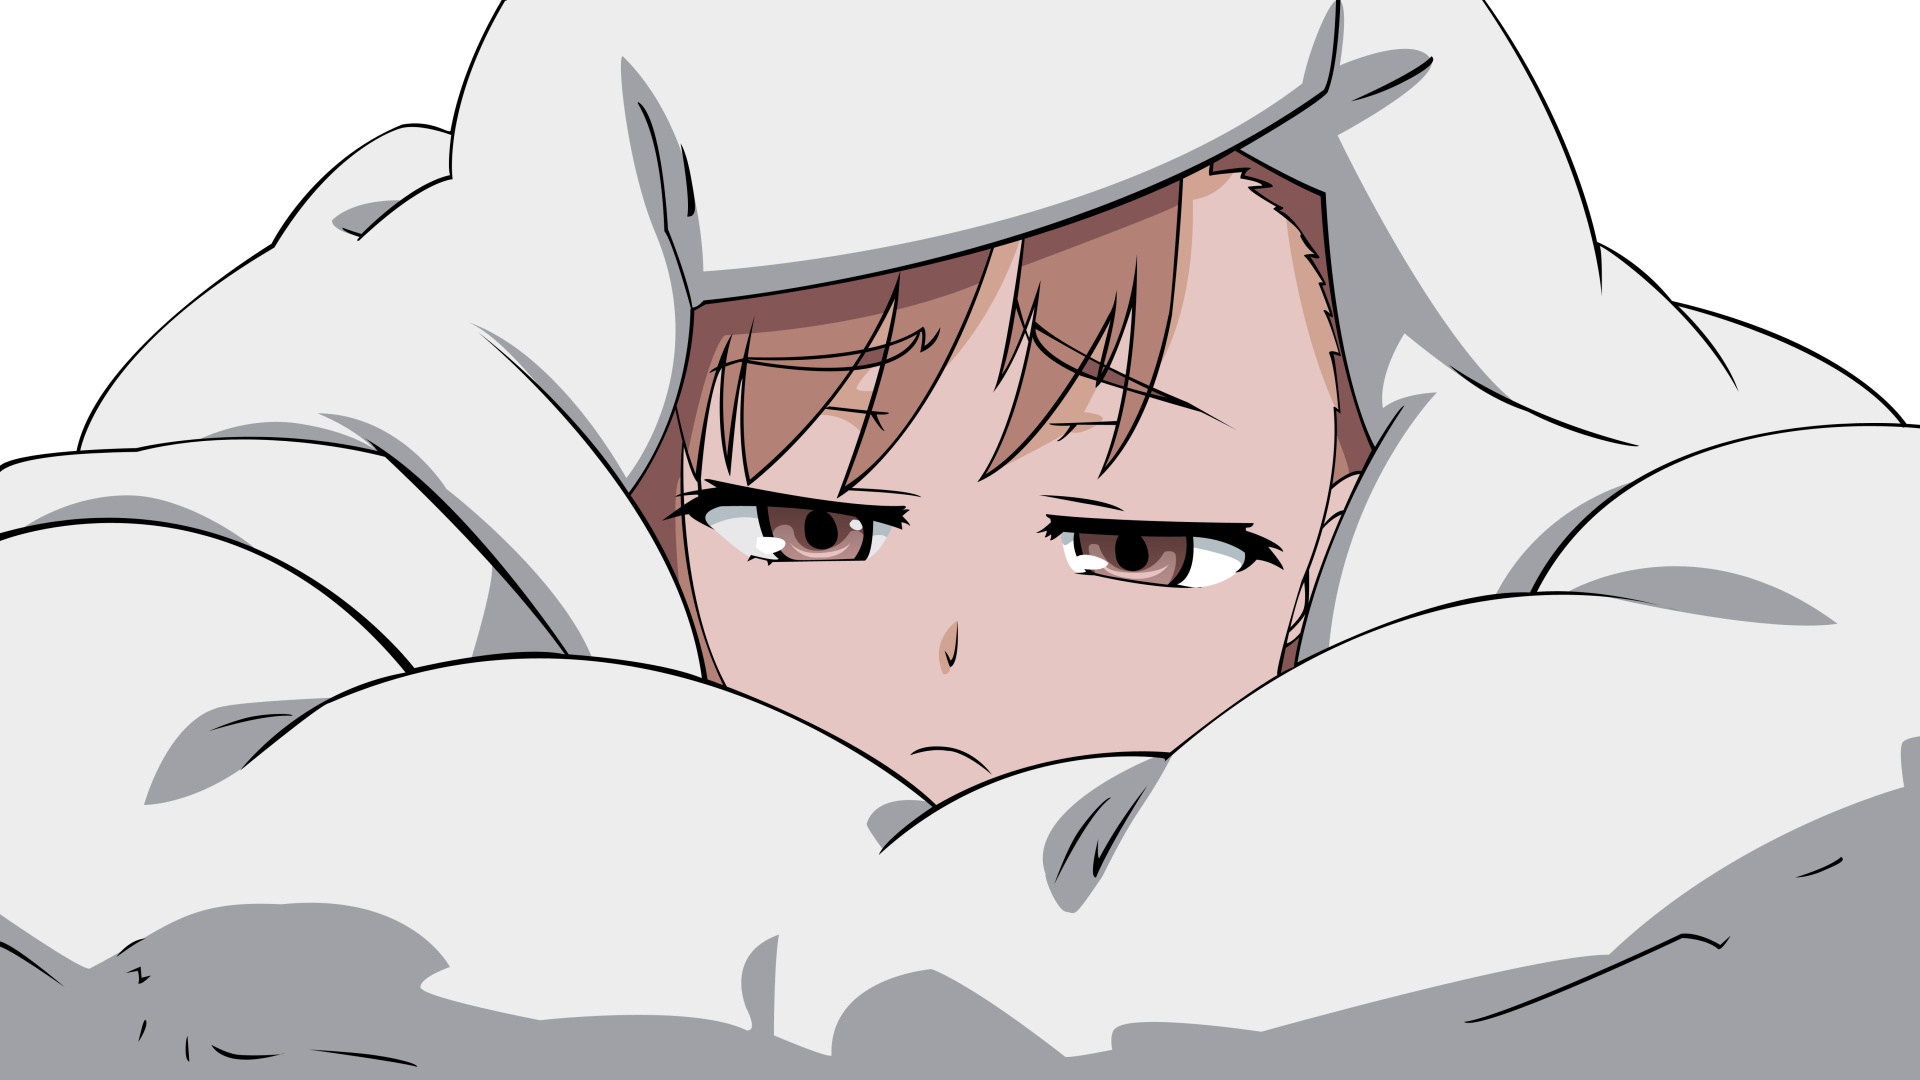 Who ordered Atsushi in a blanket? | Anime Amino